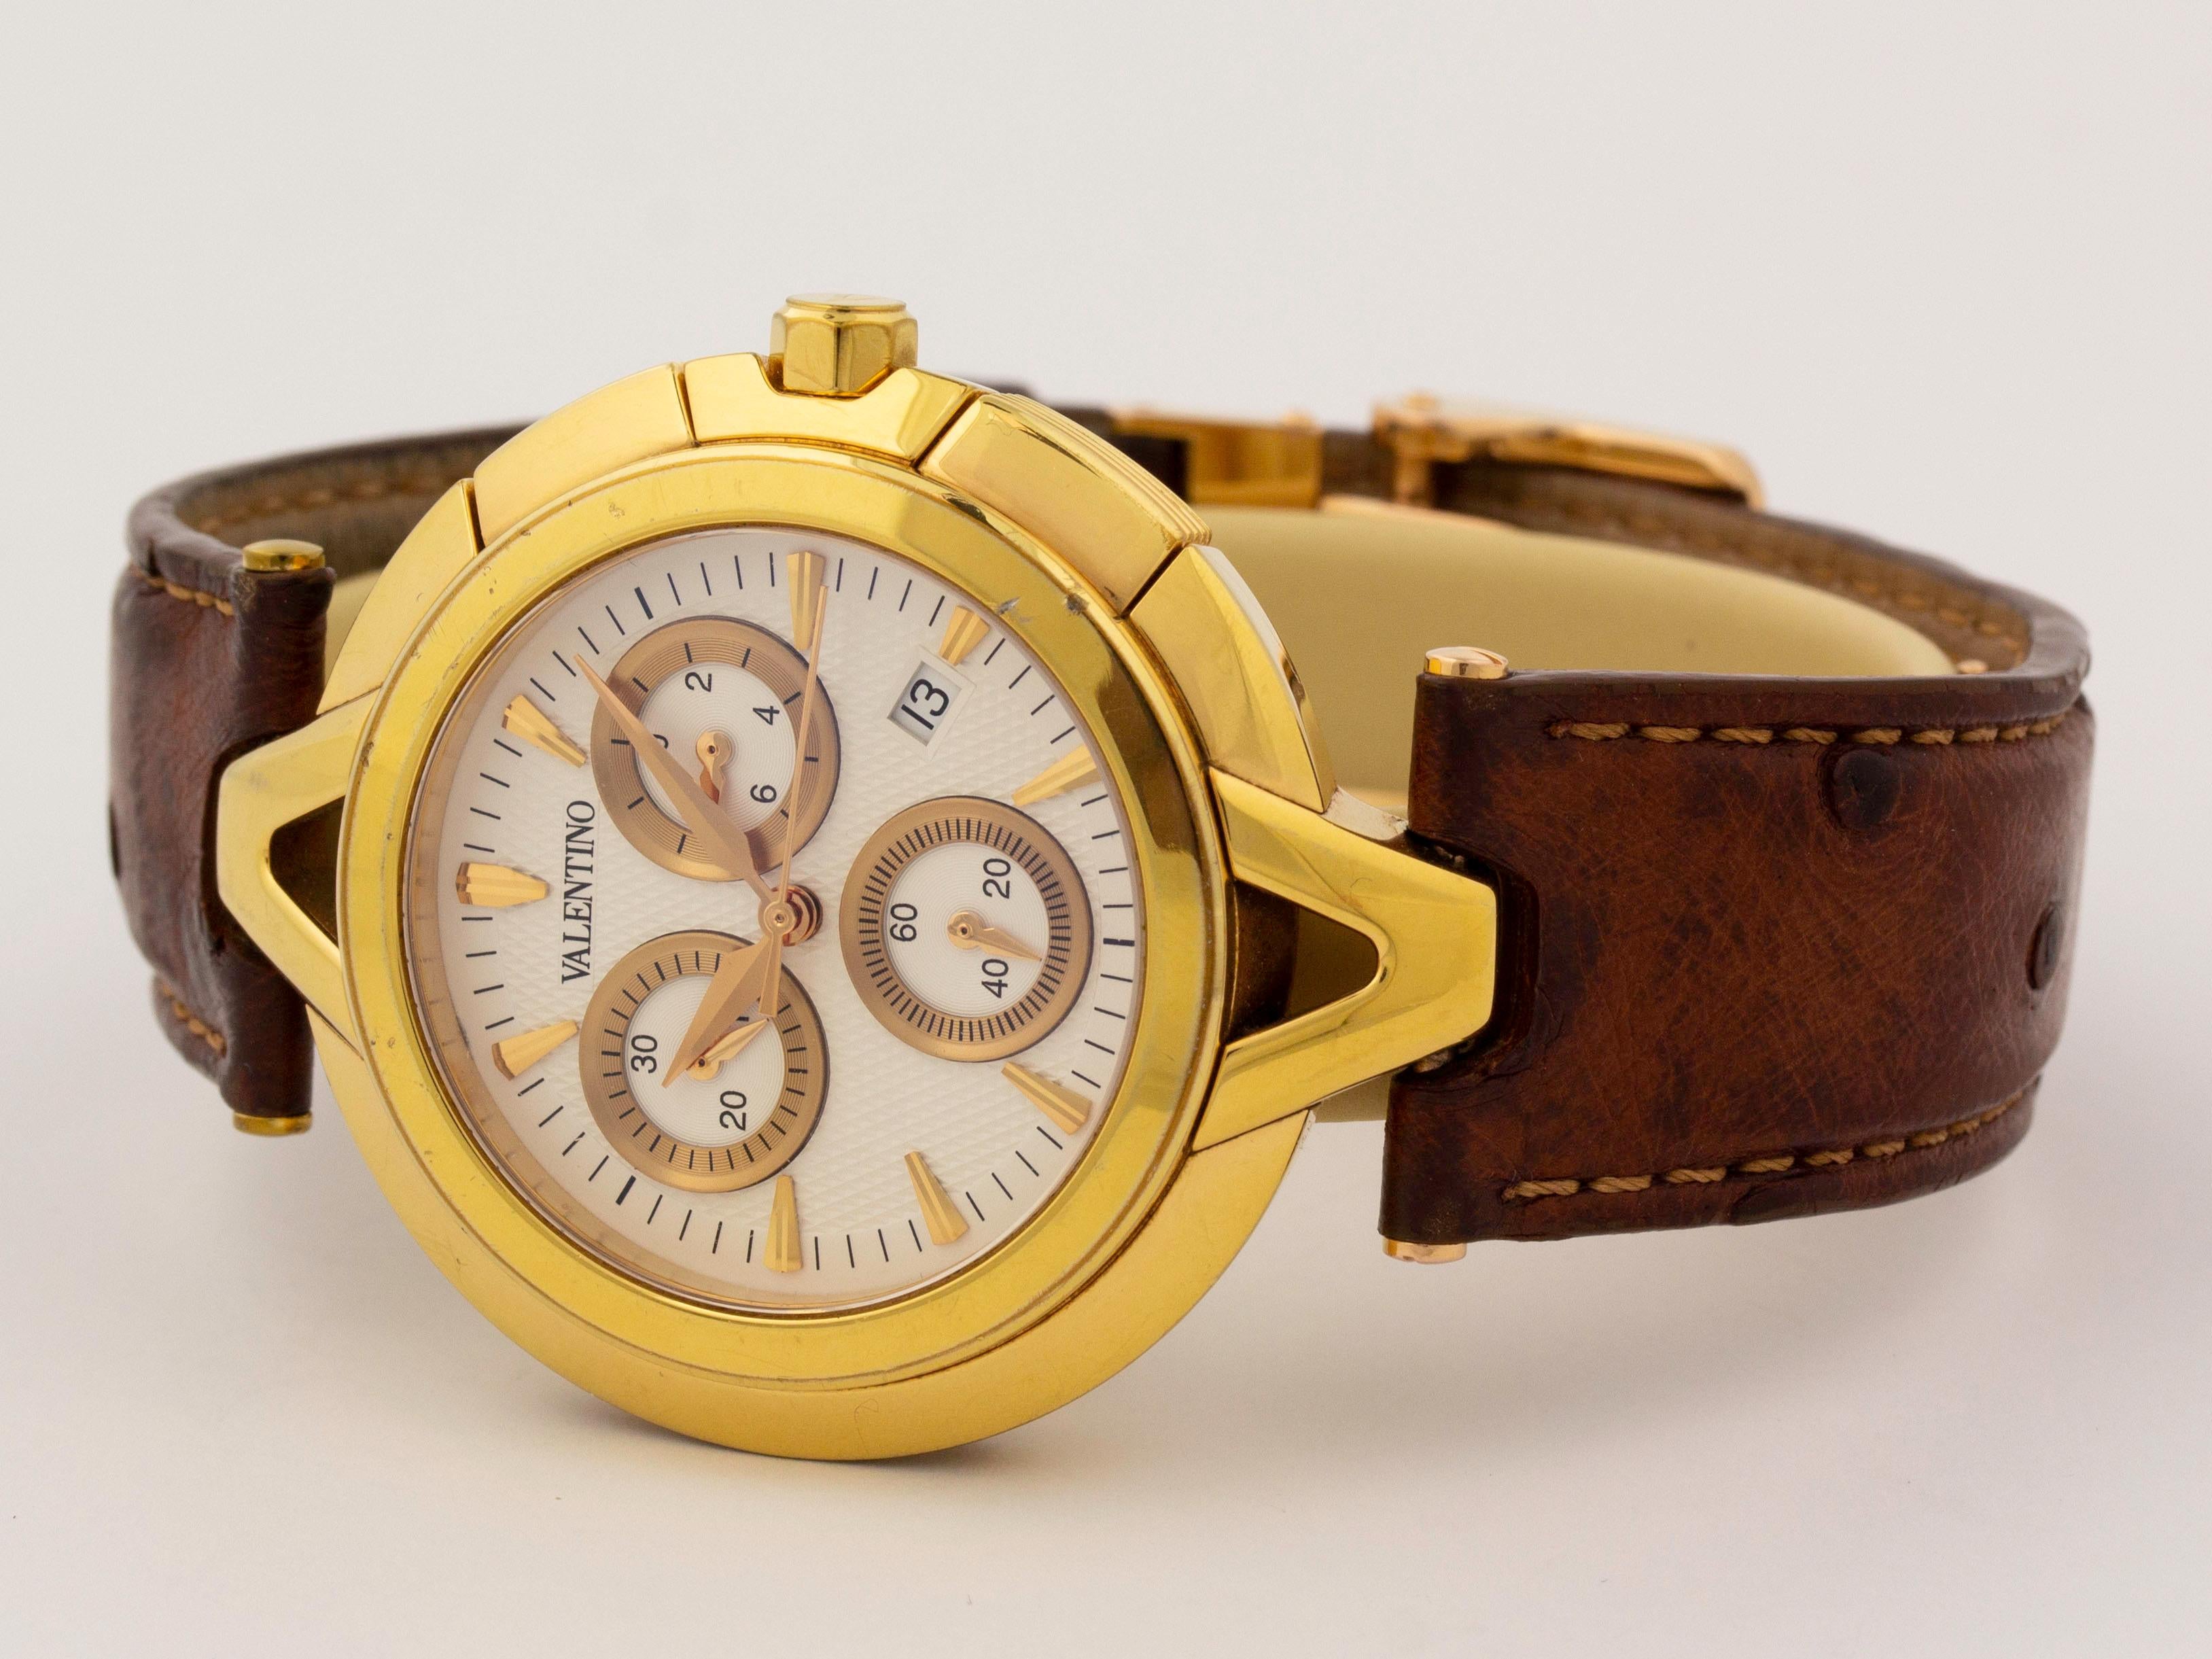 Yellow gold tone stainless steel w/ leather strap Valentino V-Valentino V51LCQ5002-S497 watch, water resistance to 30m, chronograph, with date.

Watch	
Brand:	Valentino
Series:	V-Valentino
Model #:	V51LCQ5002-S497
Gender:	Men’s
Condition:	Excellent